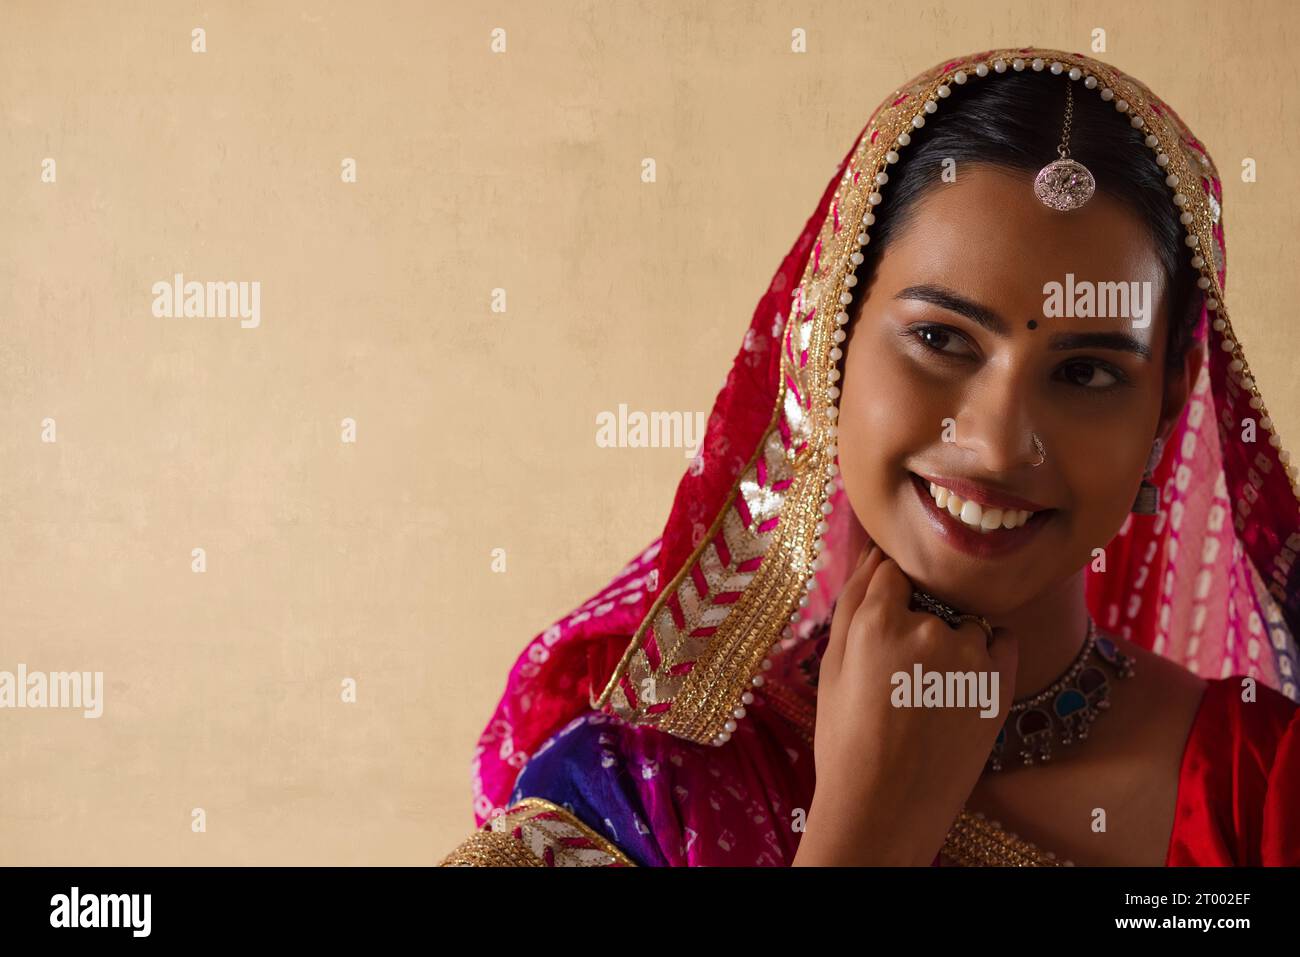 Close-up portrait of a cheerful Rajasthani young woman against plain background Stock Photo